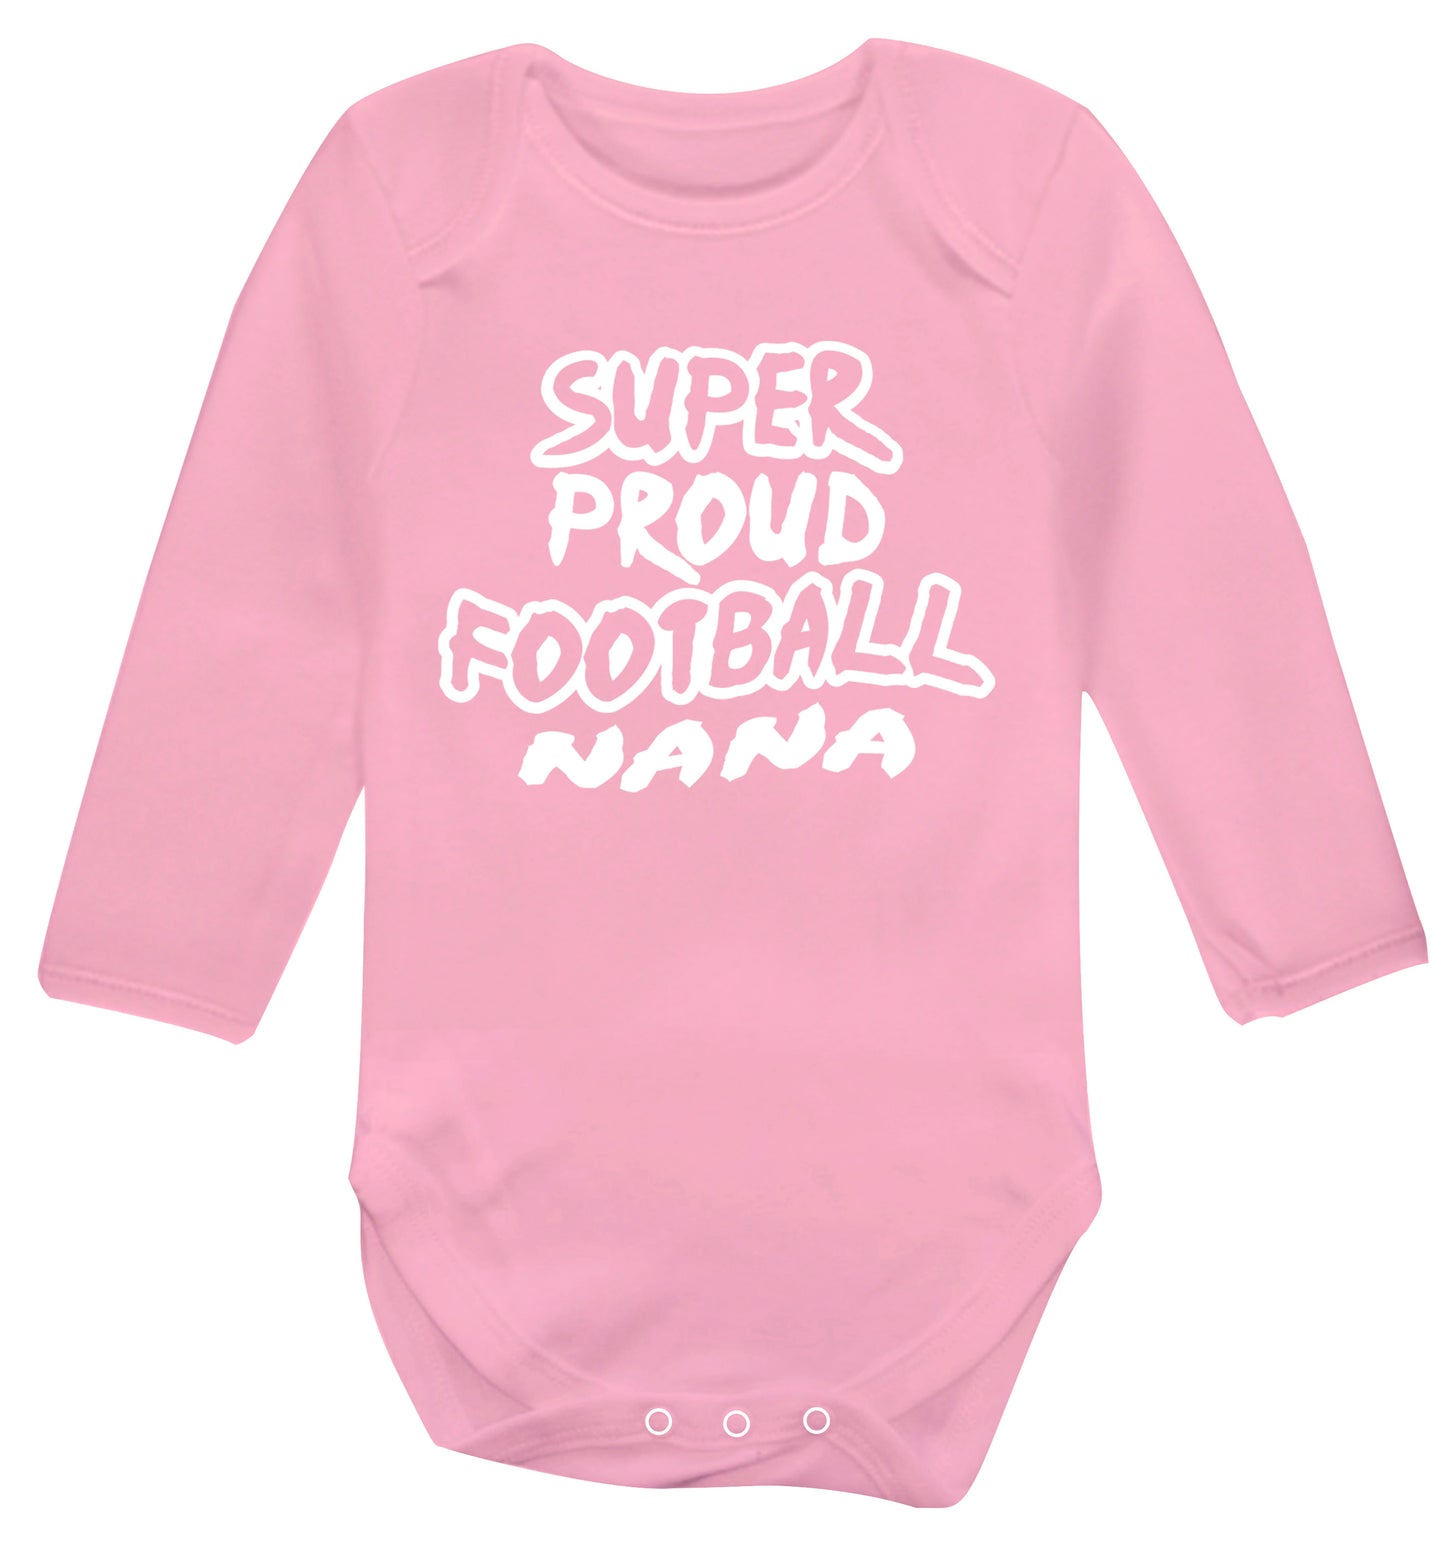 Super proud football nana Baby Vest long sleeved pale pink 6-12 months